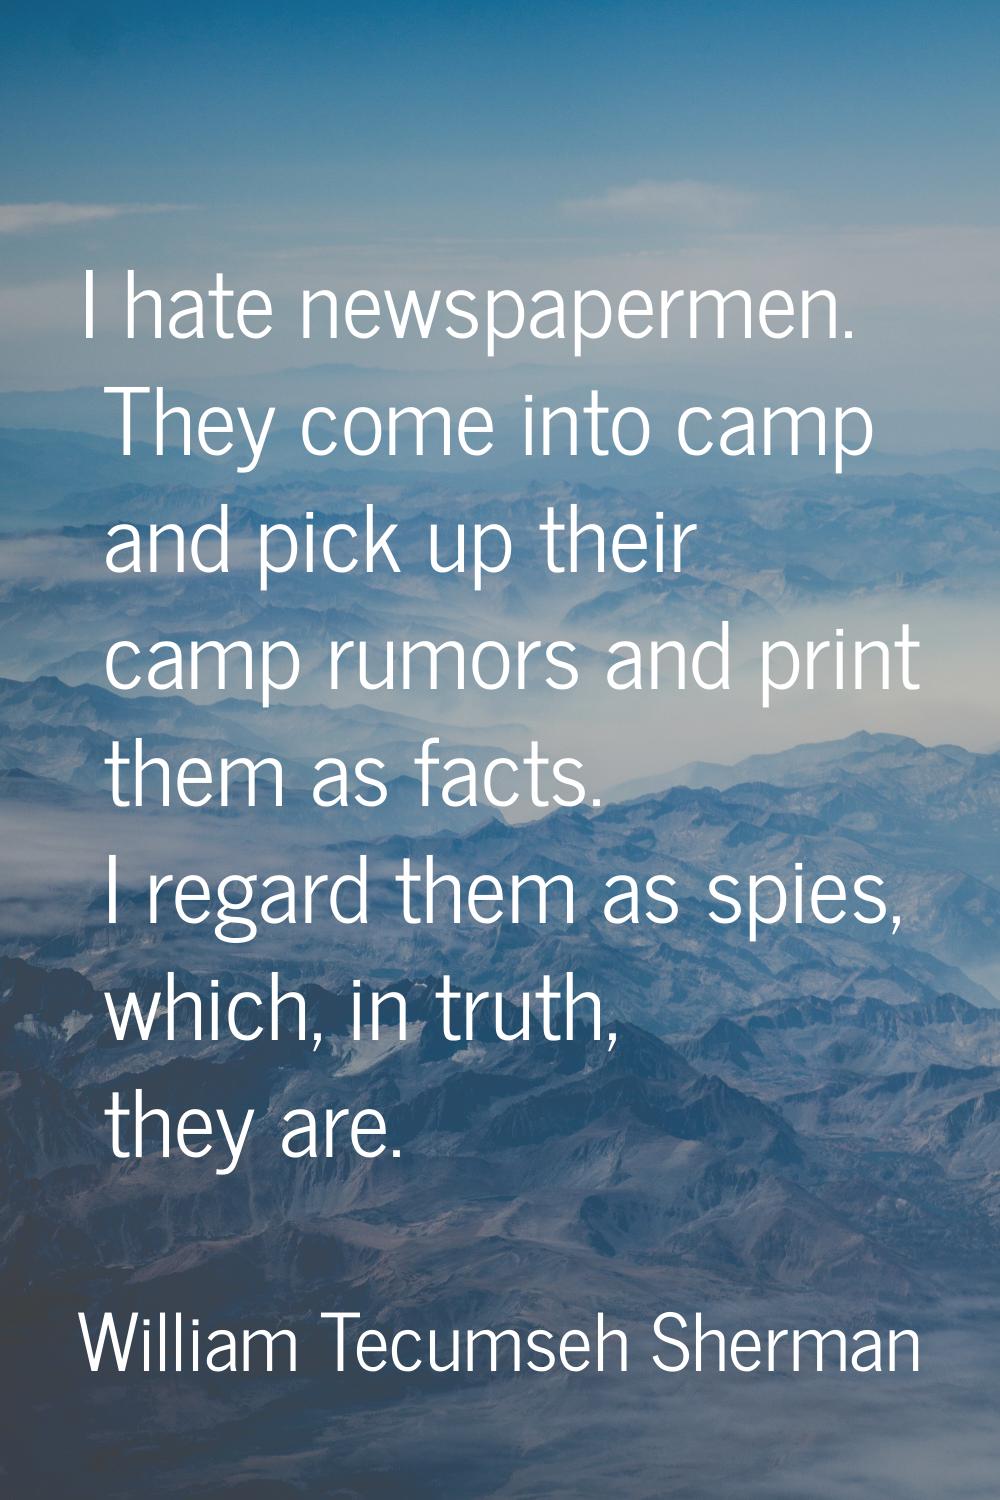 I hate newspapermen. They come into camp and pick up their camp rumors and print them as facts. I r